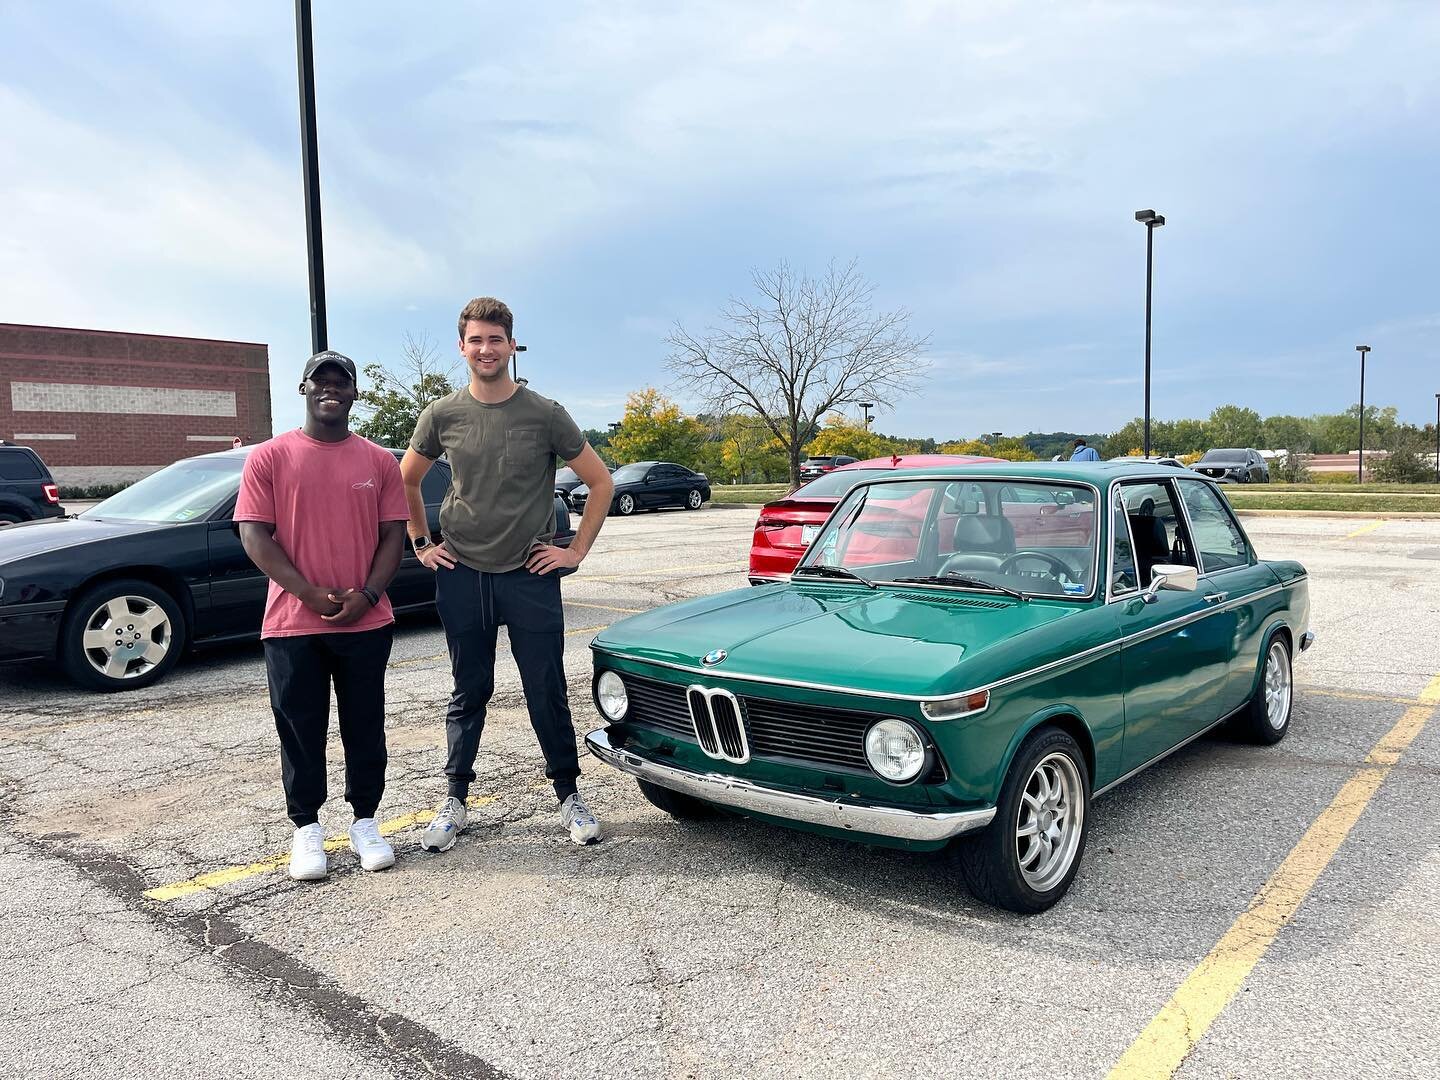 This past Saturday, our team at Papertrail got out to @carsandcoffeestl, where Alex got to show off his newly modified BMW 1 Series. Always a great time interacting with the local car community!